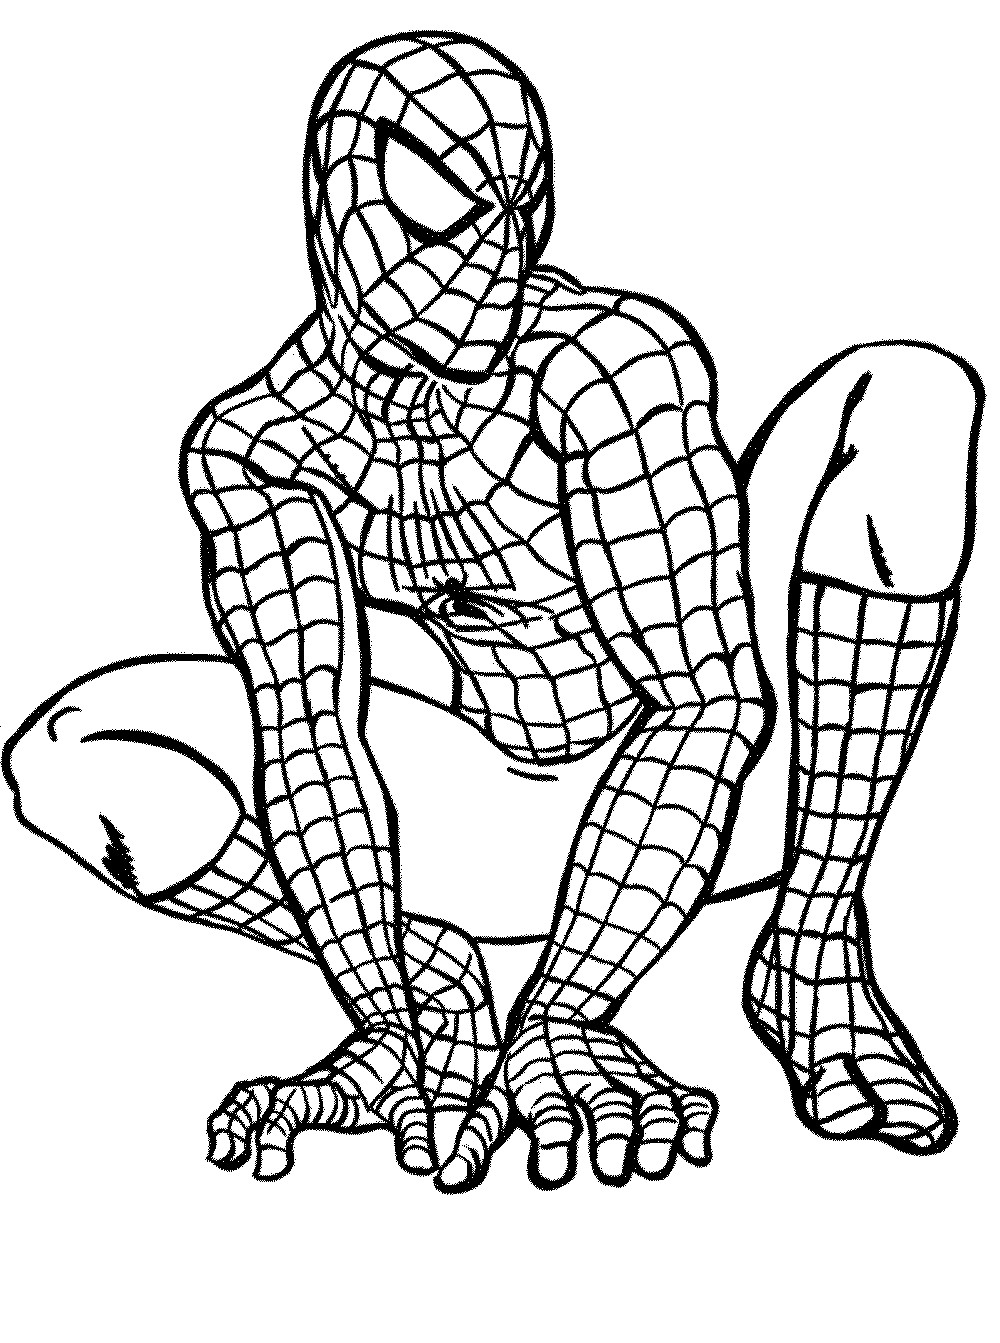 Coloring Sheets For Boys Spiderman
 Related image Cartoon Characters